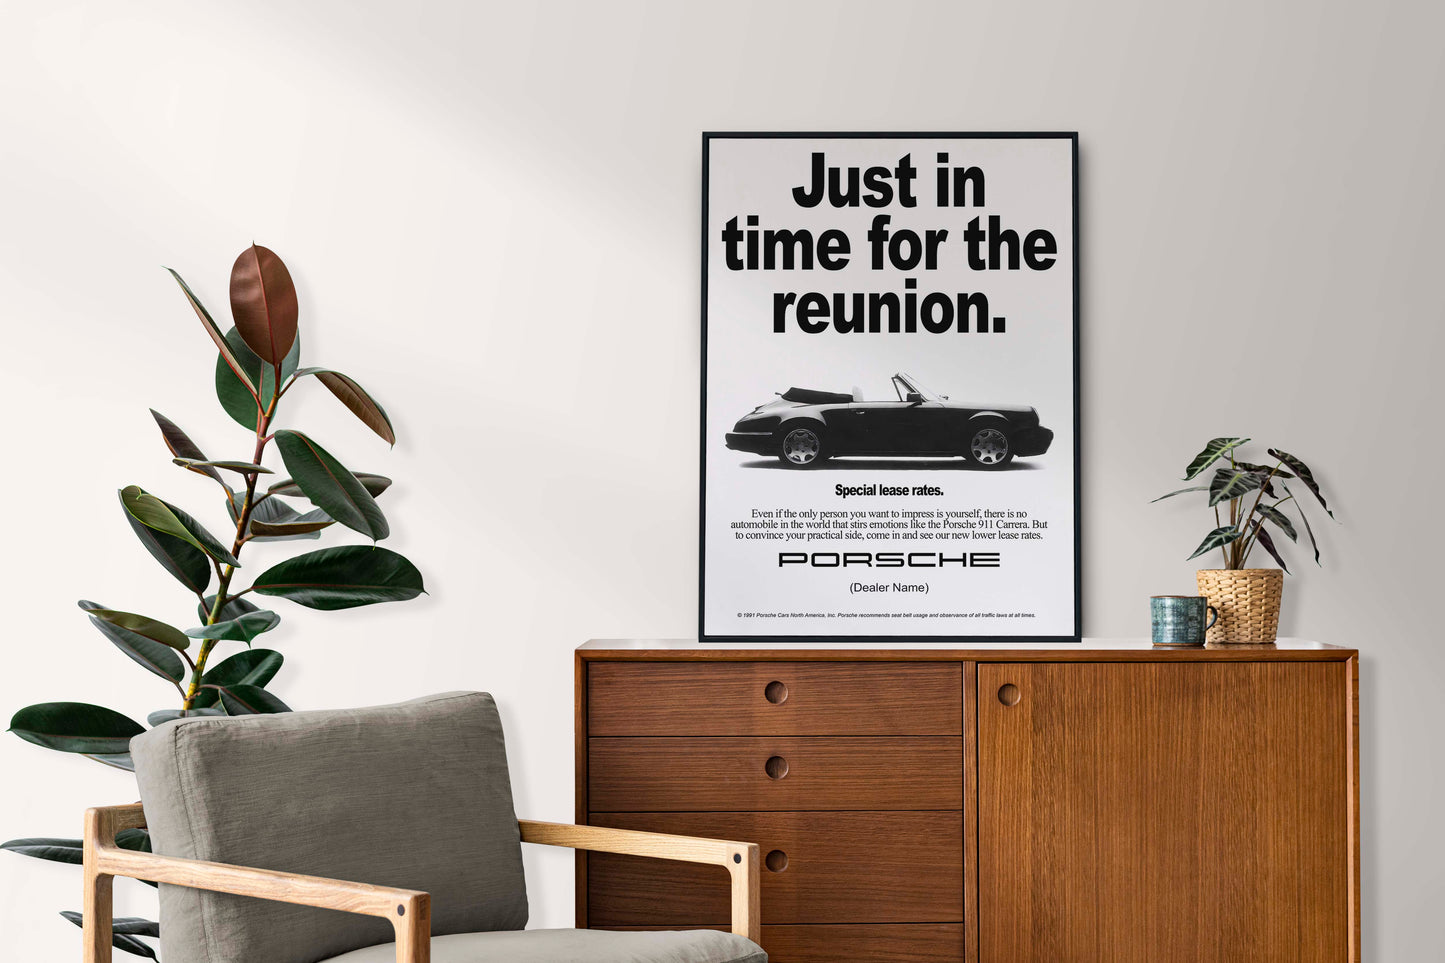 Porsche "Just In Time For The Reunion" Poster